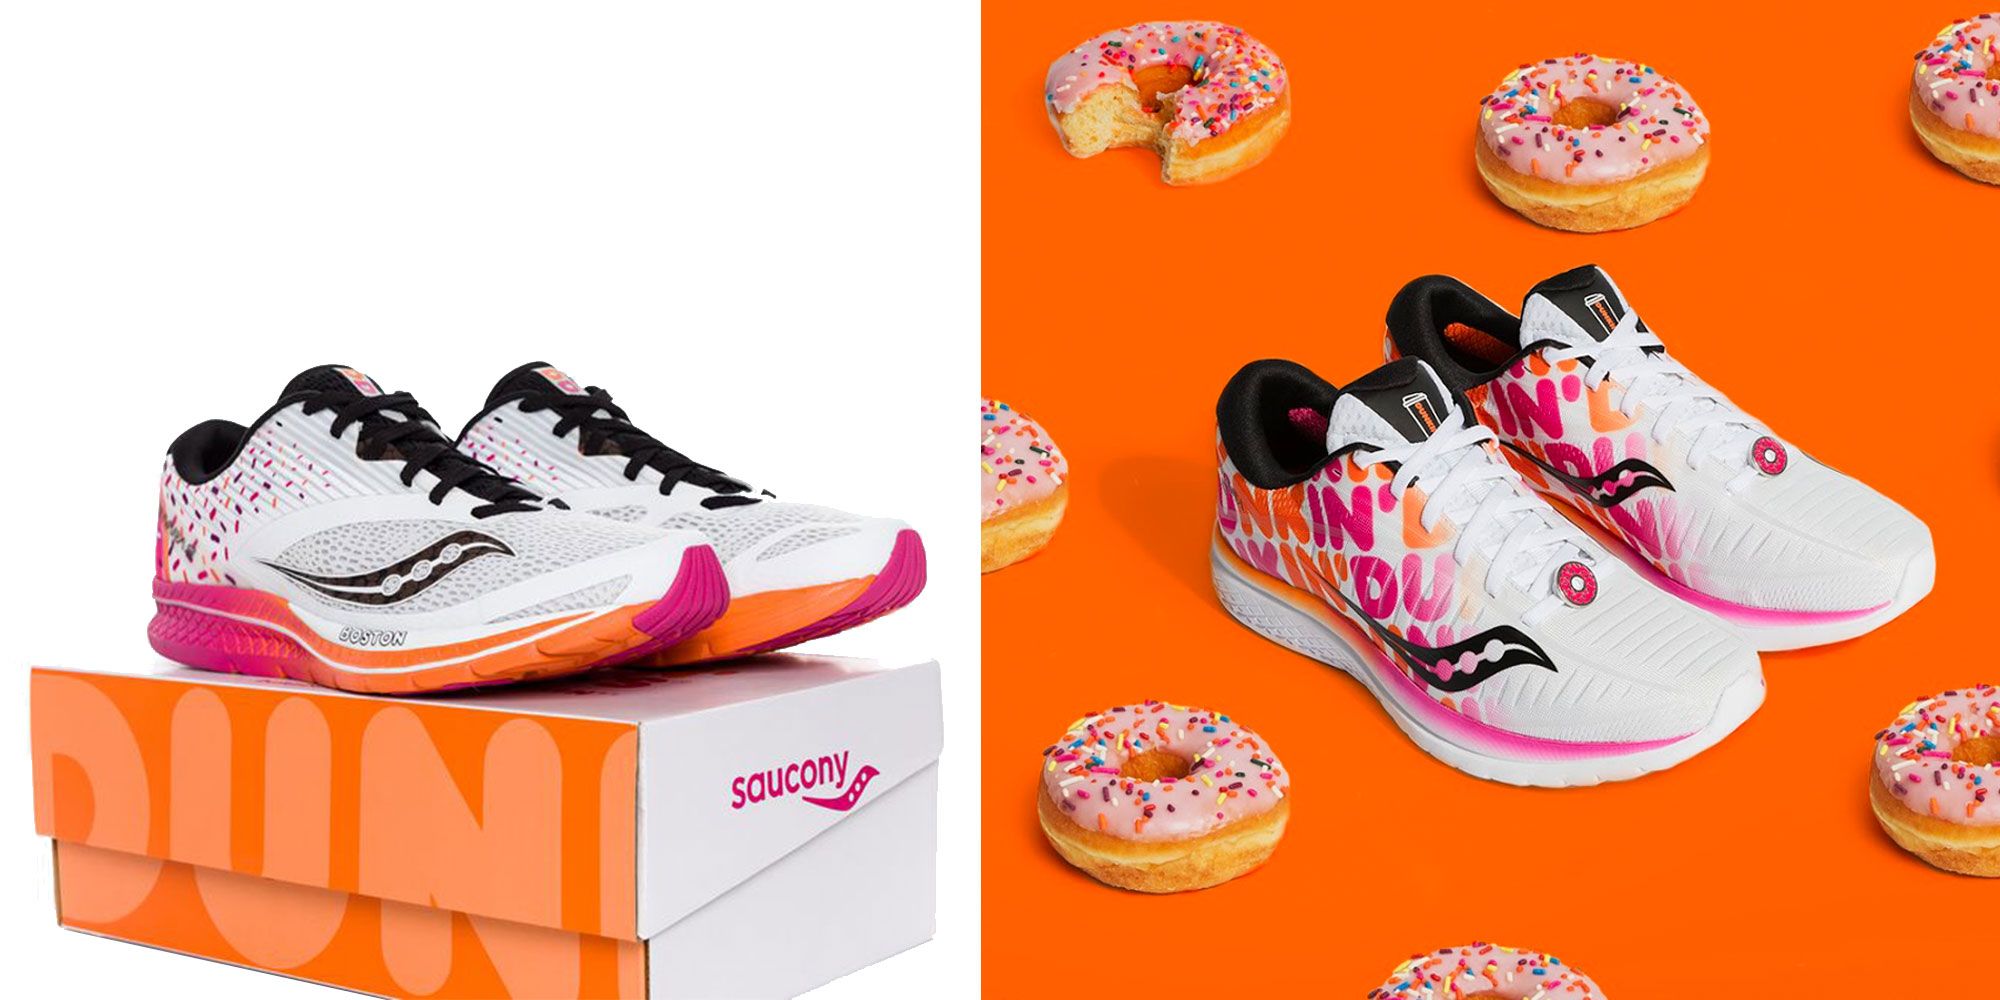 dunkin donuts shoes 1970s